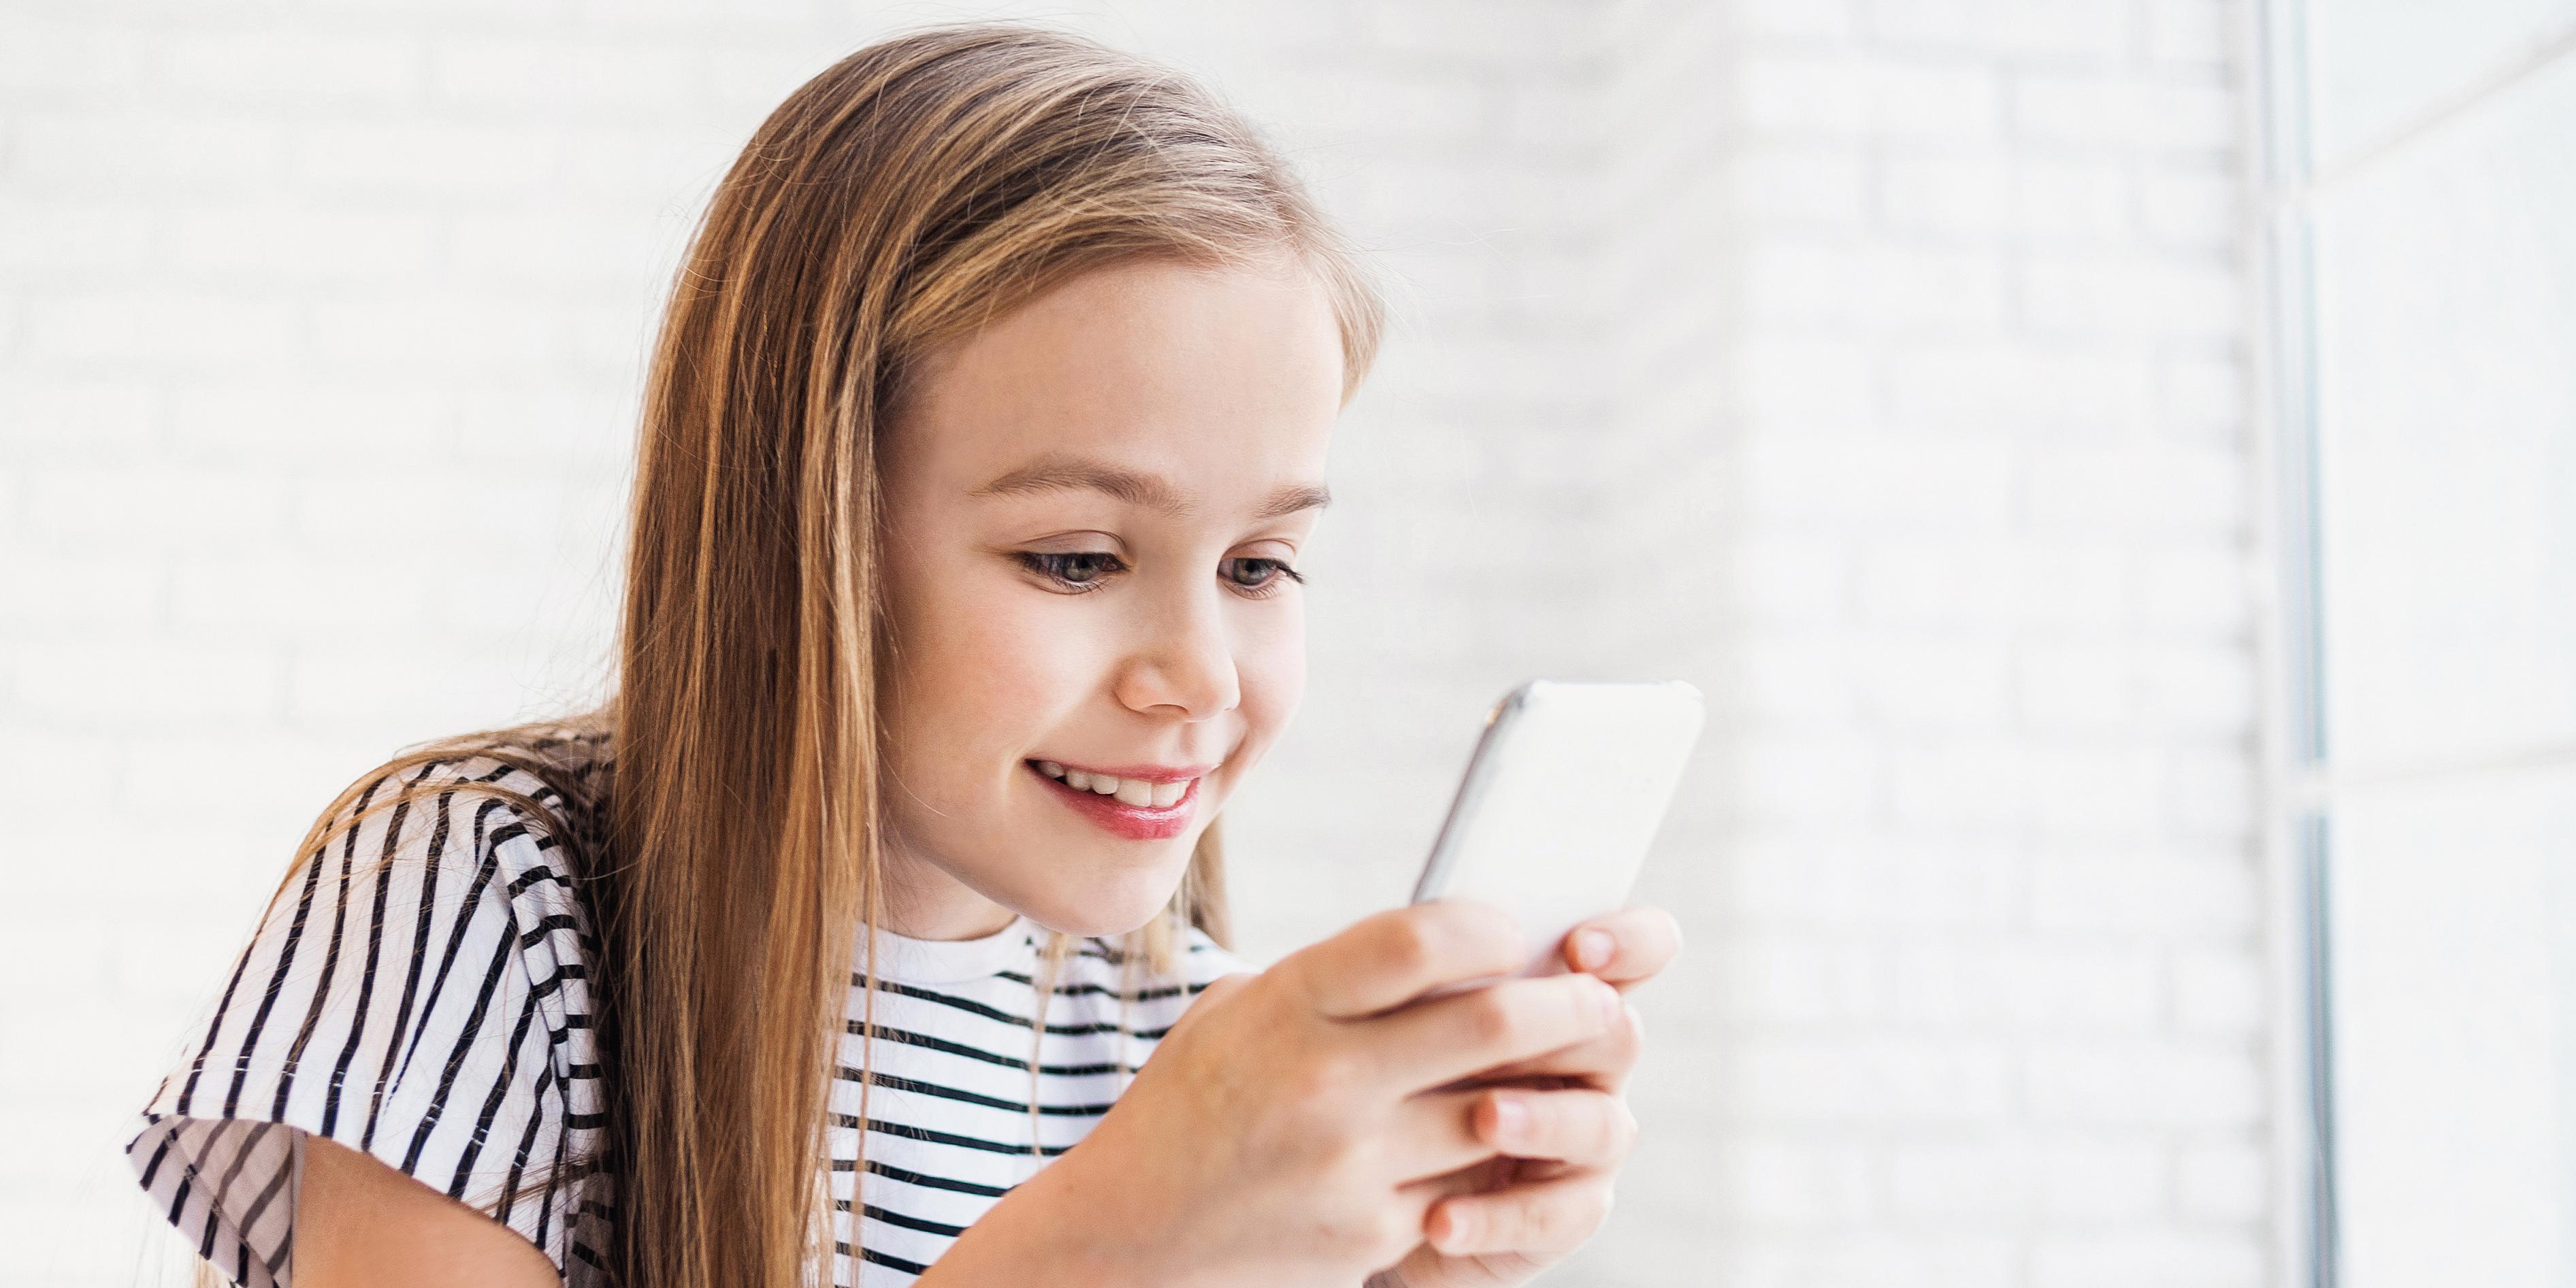 A Child's First Smartphone: 4 Things to Consider - Swappie